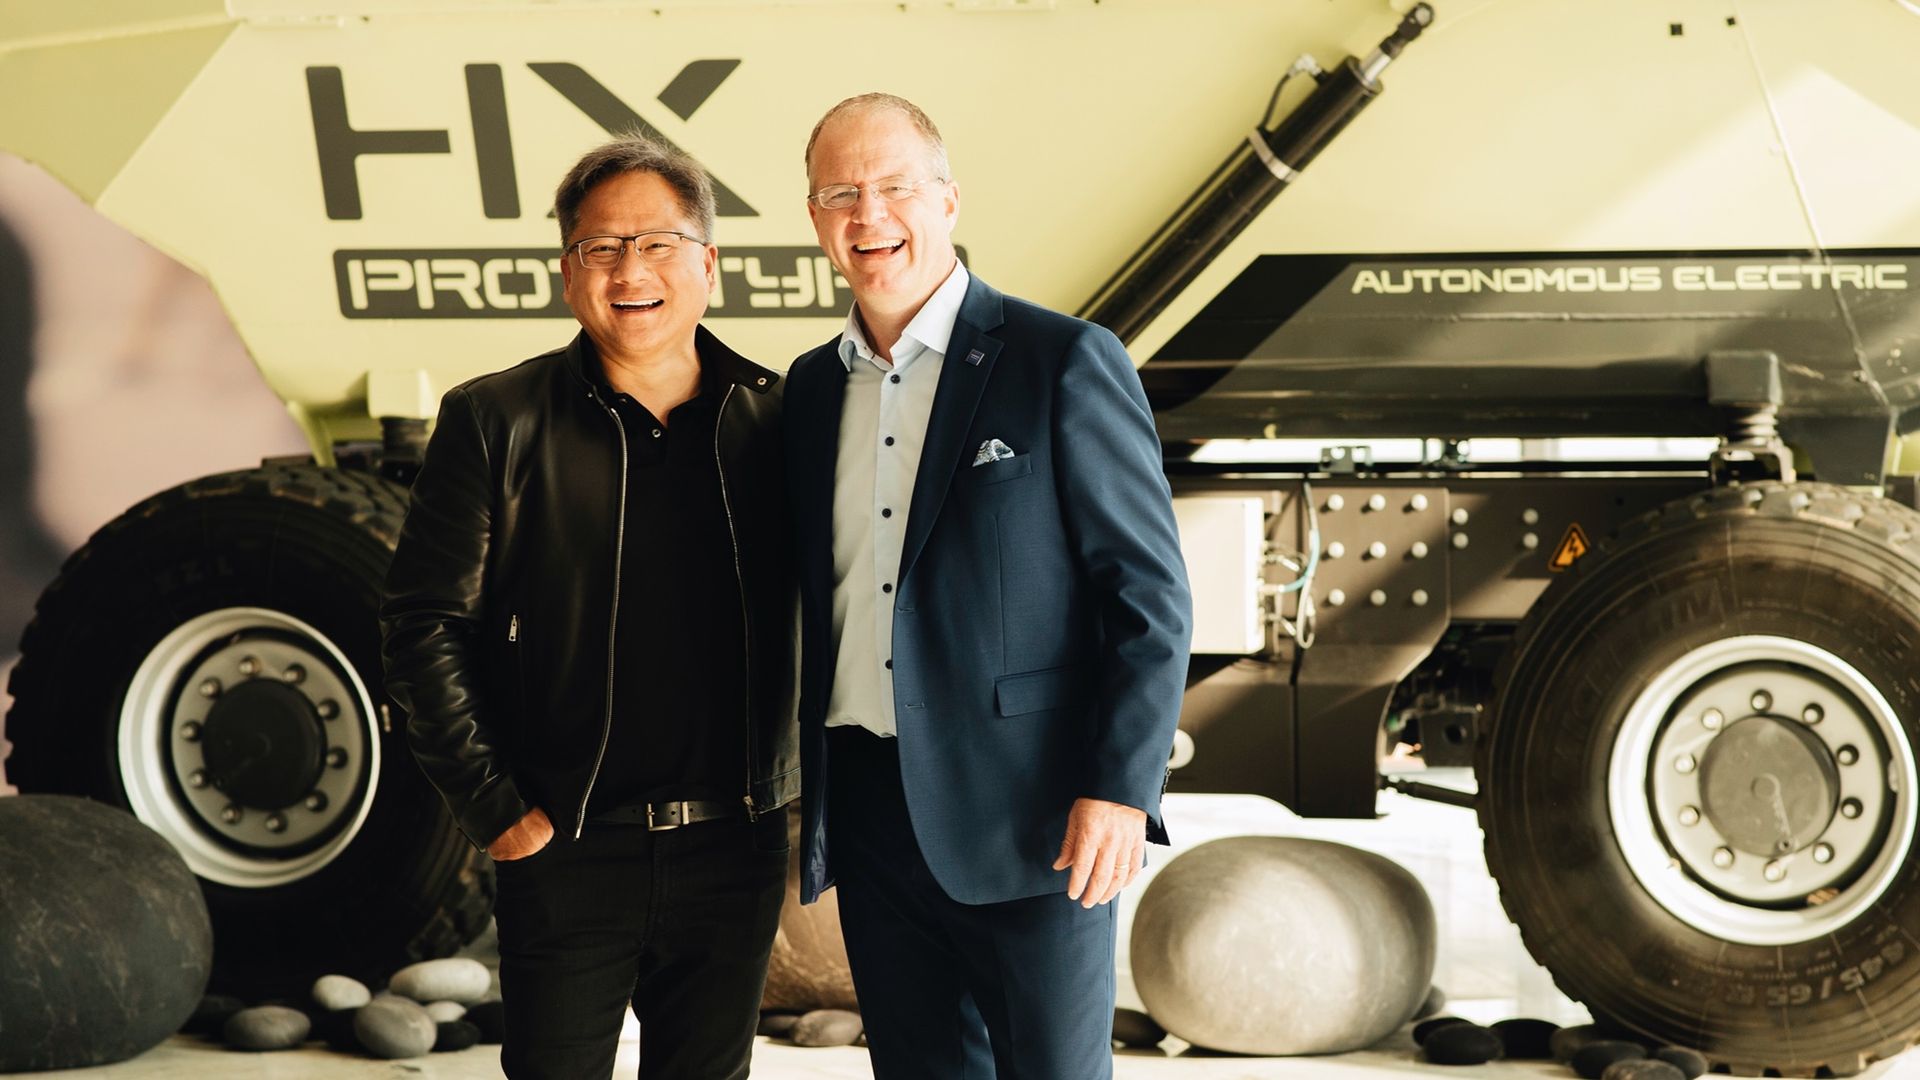 Martin Lundstedt, President and CEO of the Volvo Group, and Jensen Huang, founder and CEO of NVIDIA, stand before a prototype autonomous truck at a Volvo event in Gothenburg Sweden.